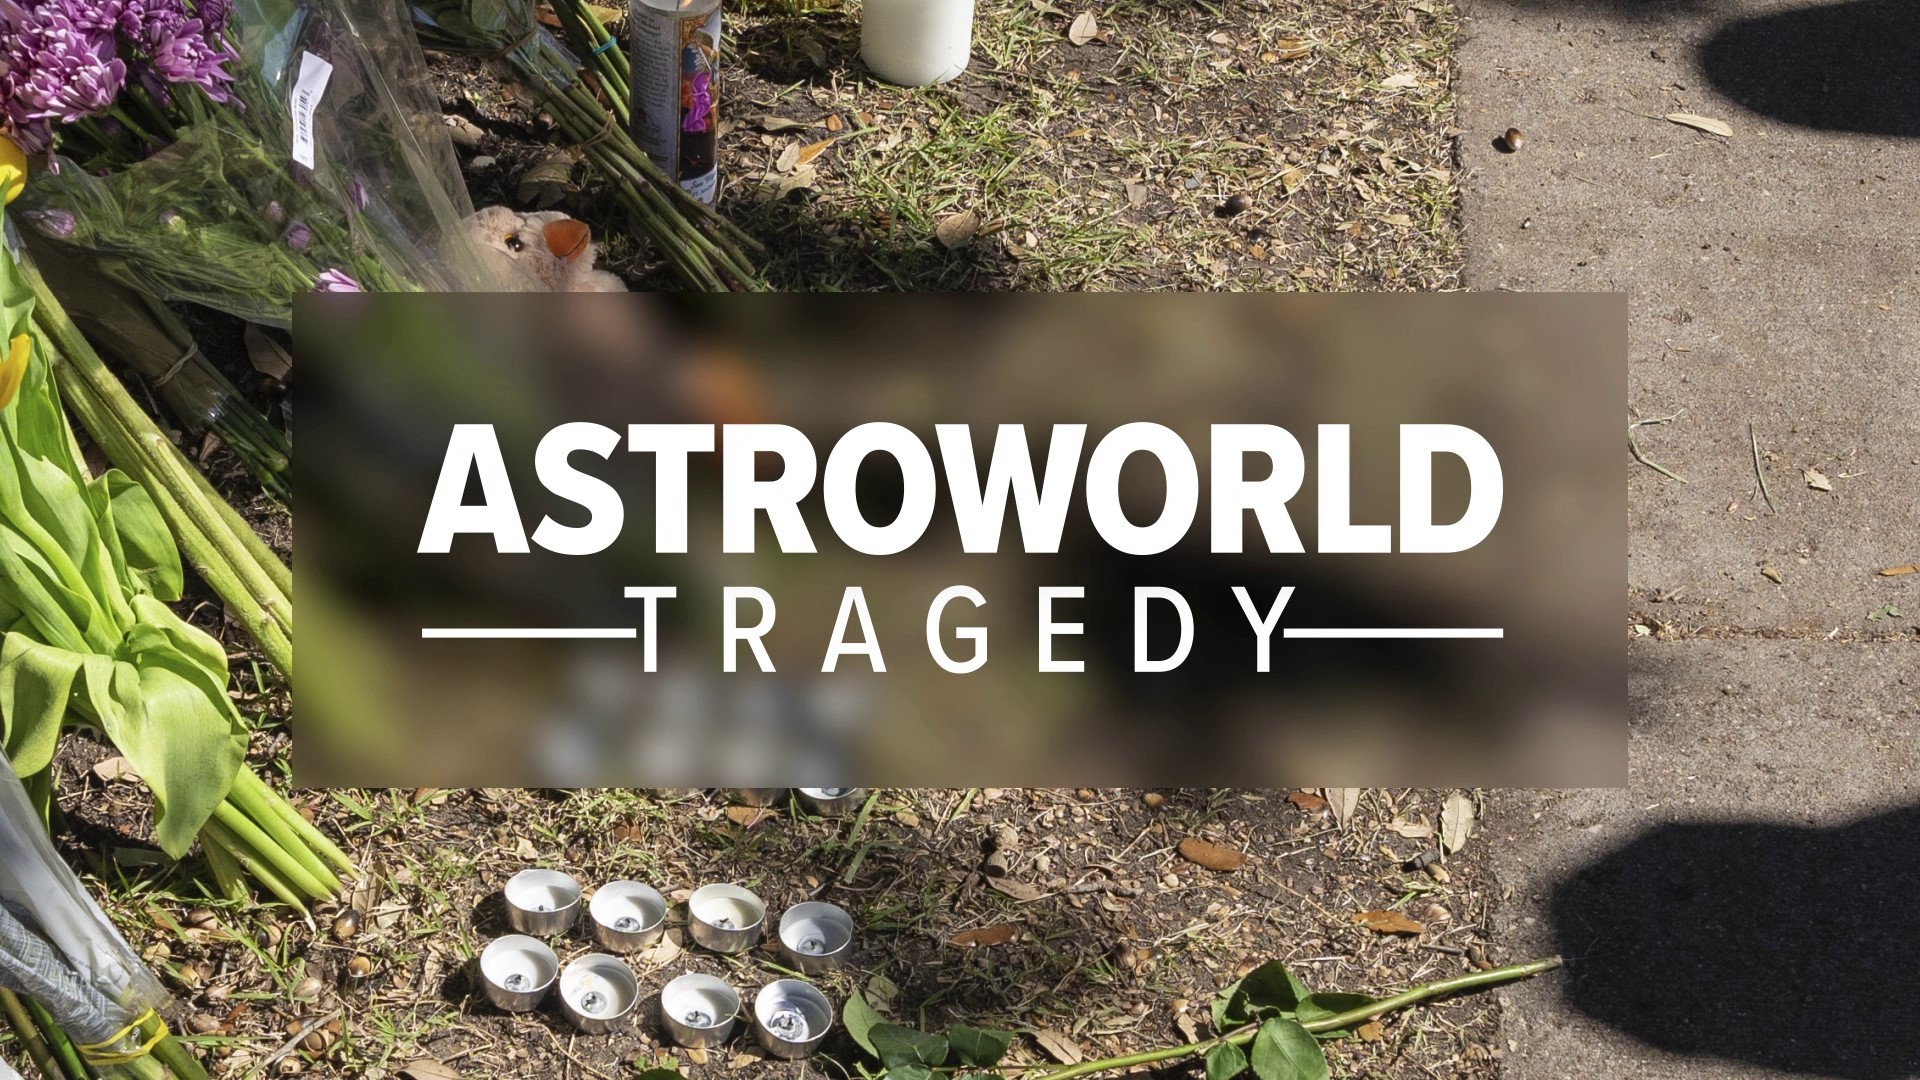 Twelve months after the tragedy at the 2021 Astroworld Music Festival, we’ll break down what led up to the event, what happened at the concert and what’s changed.